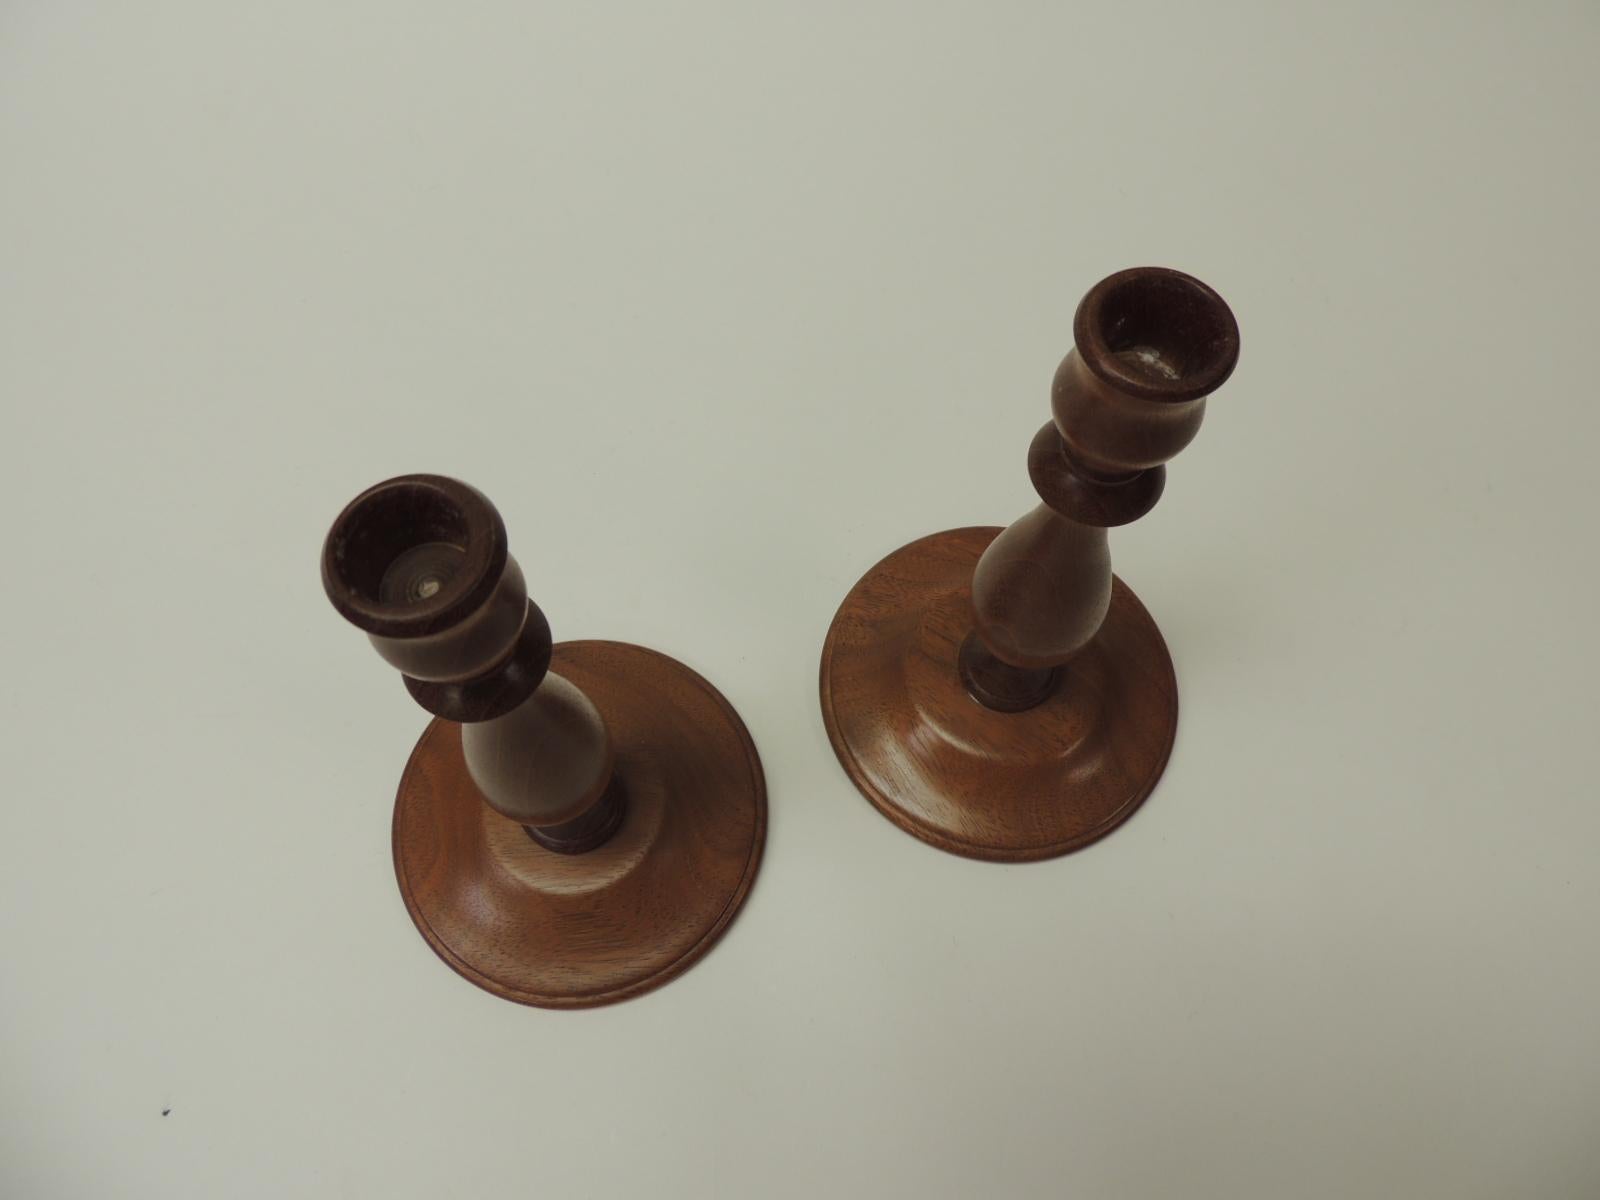 Pair of Mid-Century Modern round mahogany candle holders.
Candlestick holder signed J W 1999.
Size: 4.5 Base x 8 H.